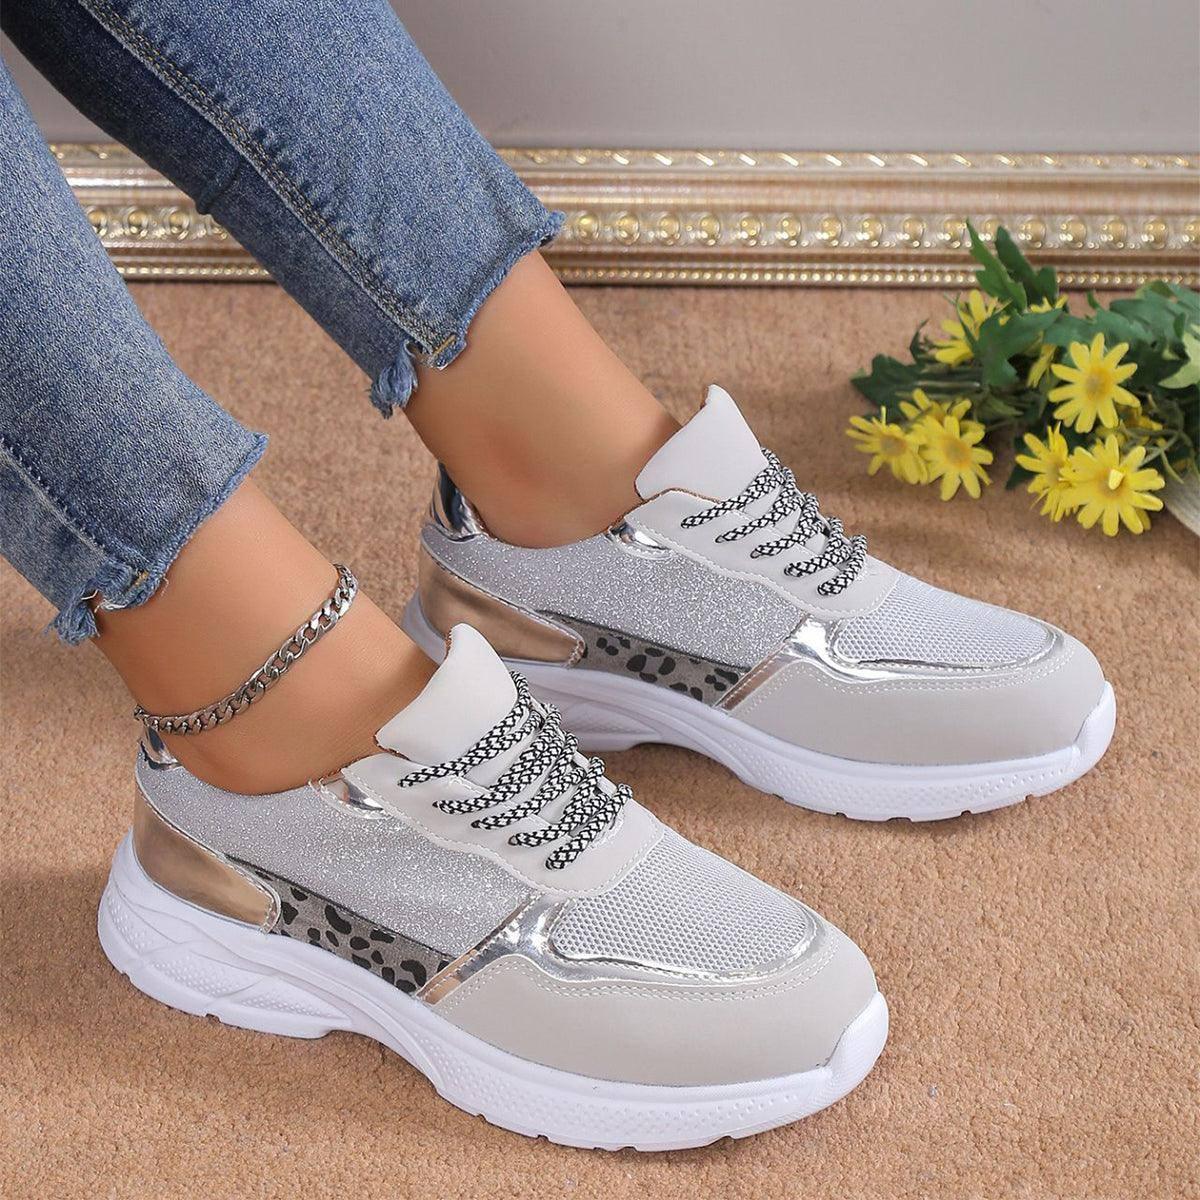 Women's Lace Up Sneakers Breathable Mesh Flat Shoes Fashion-1